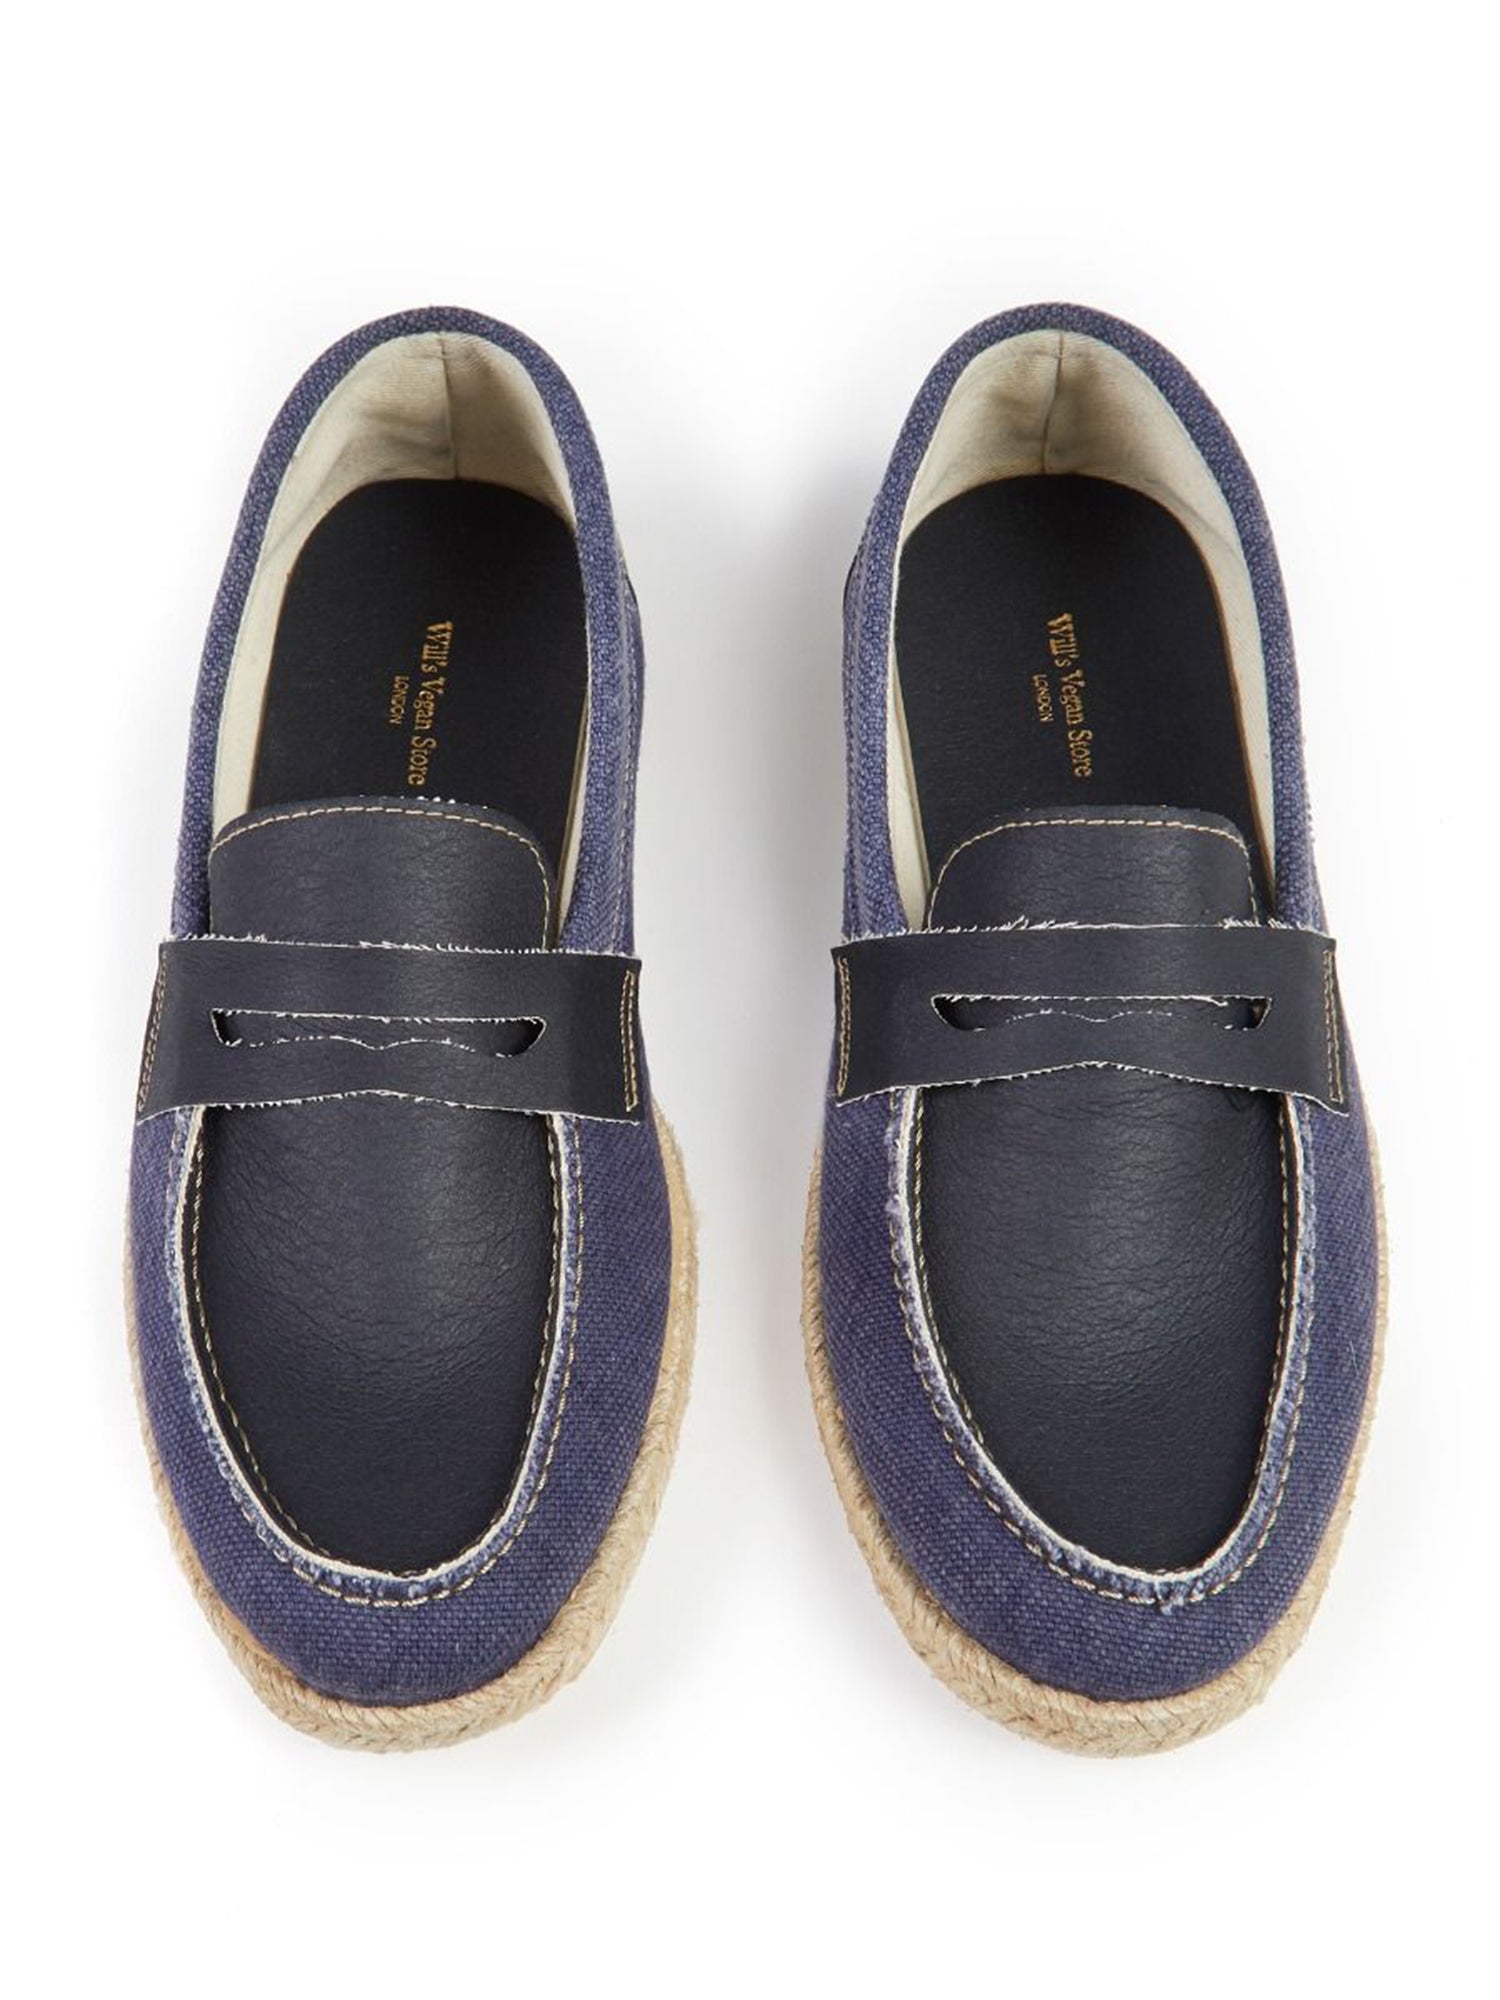 Recycled Espadrille Penny Loafers